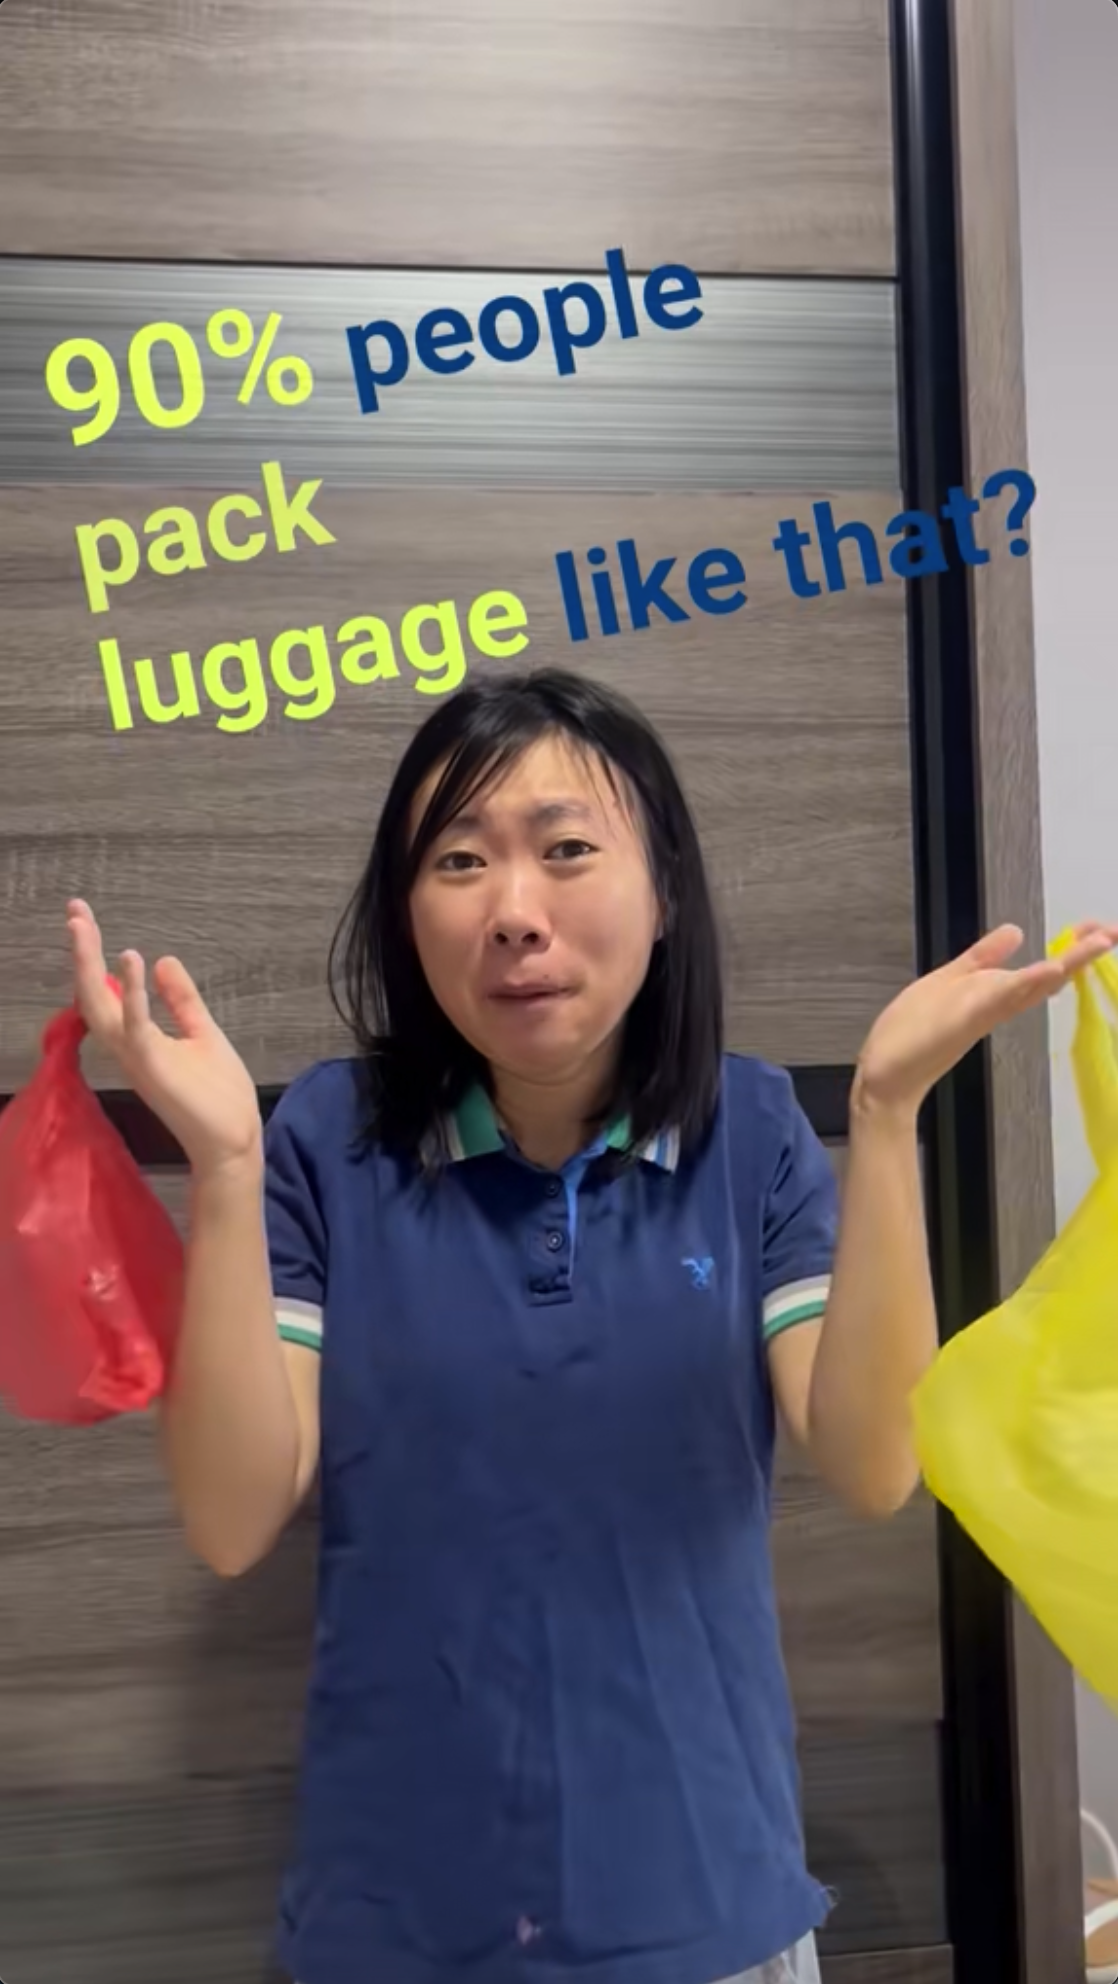 What’s the best way to pack your luggage😳?